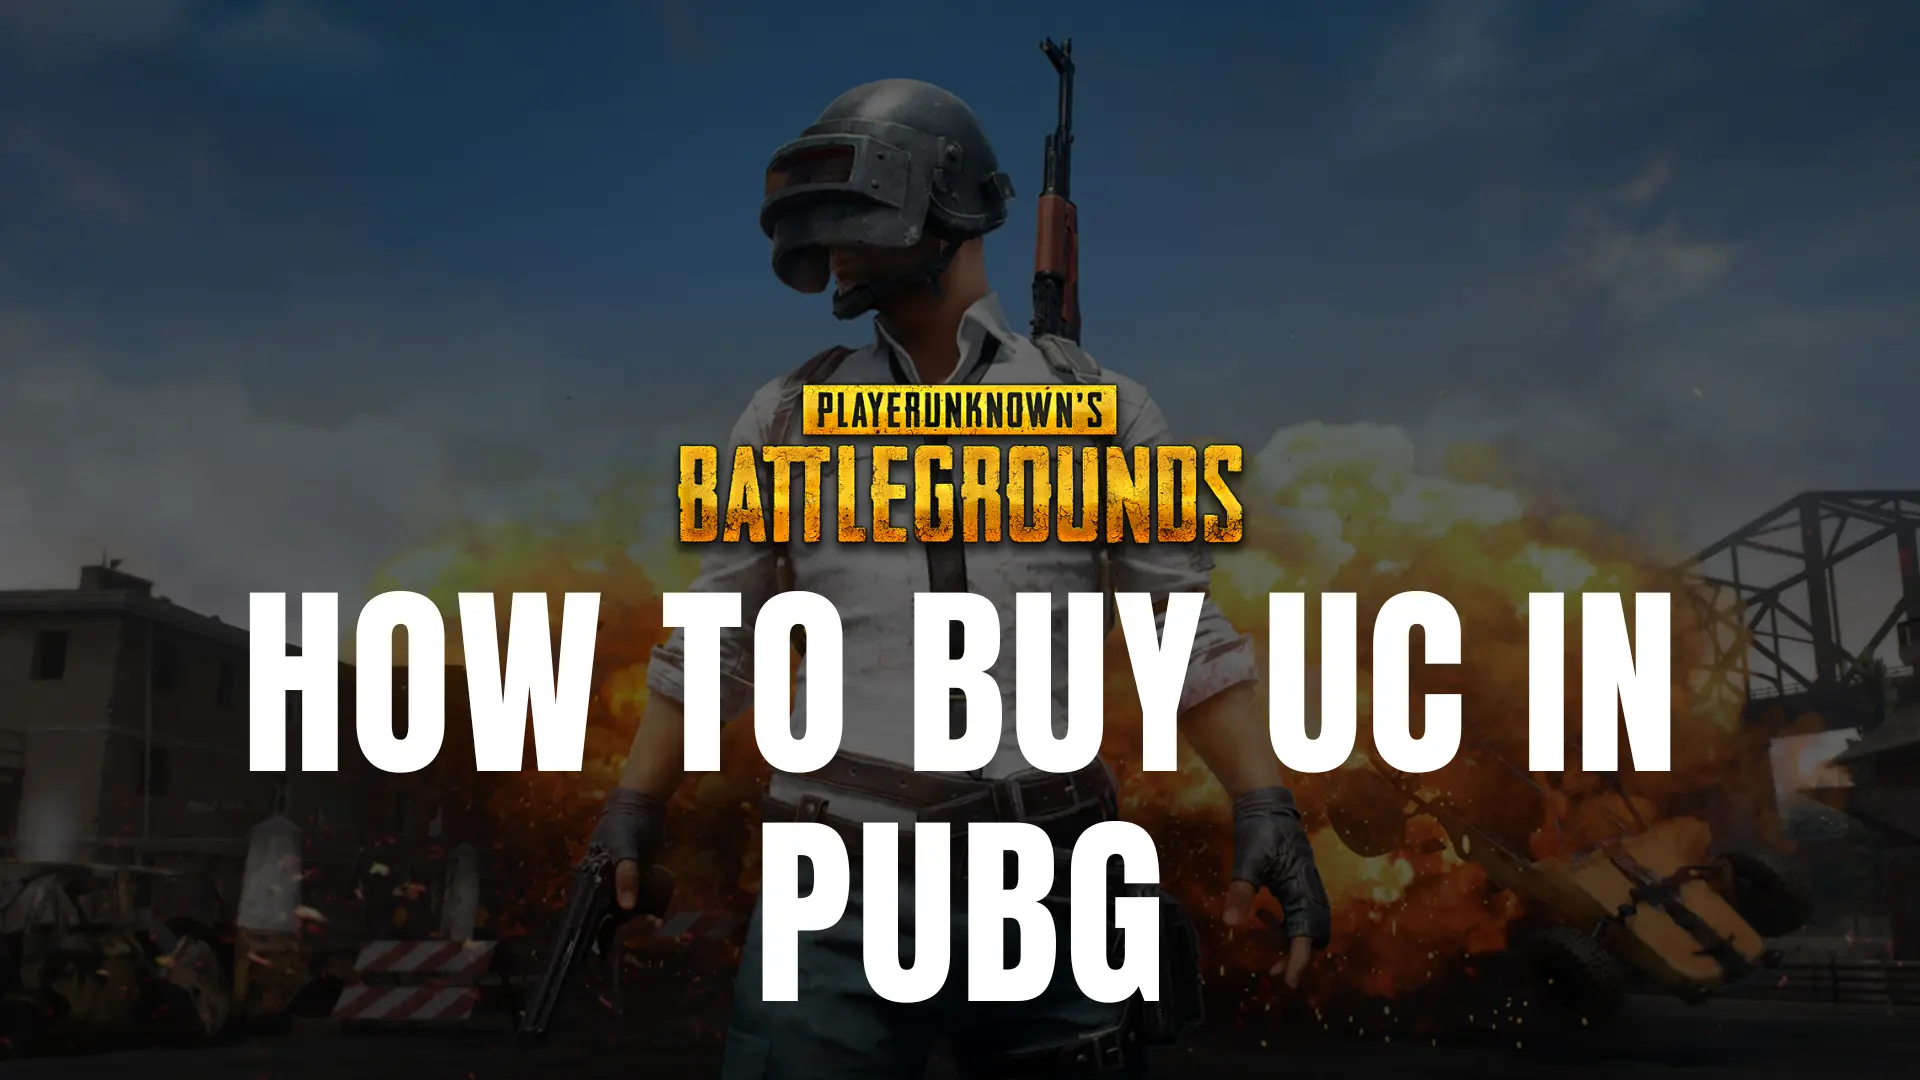 How to Buy UC in PUBG